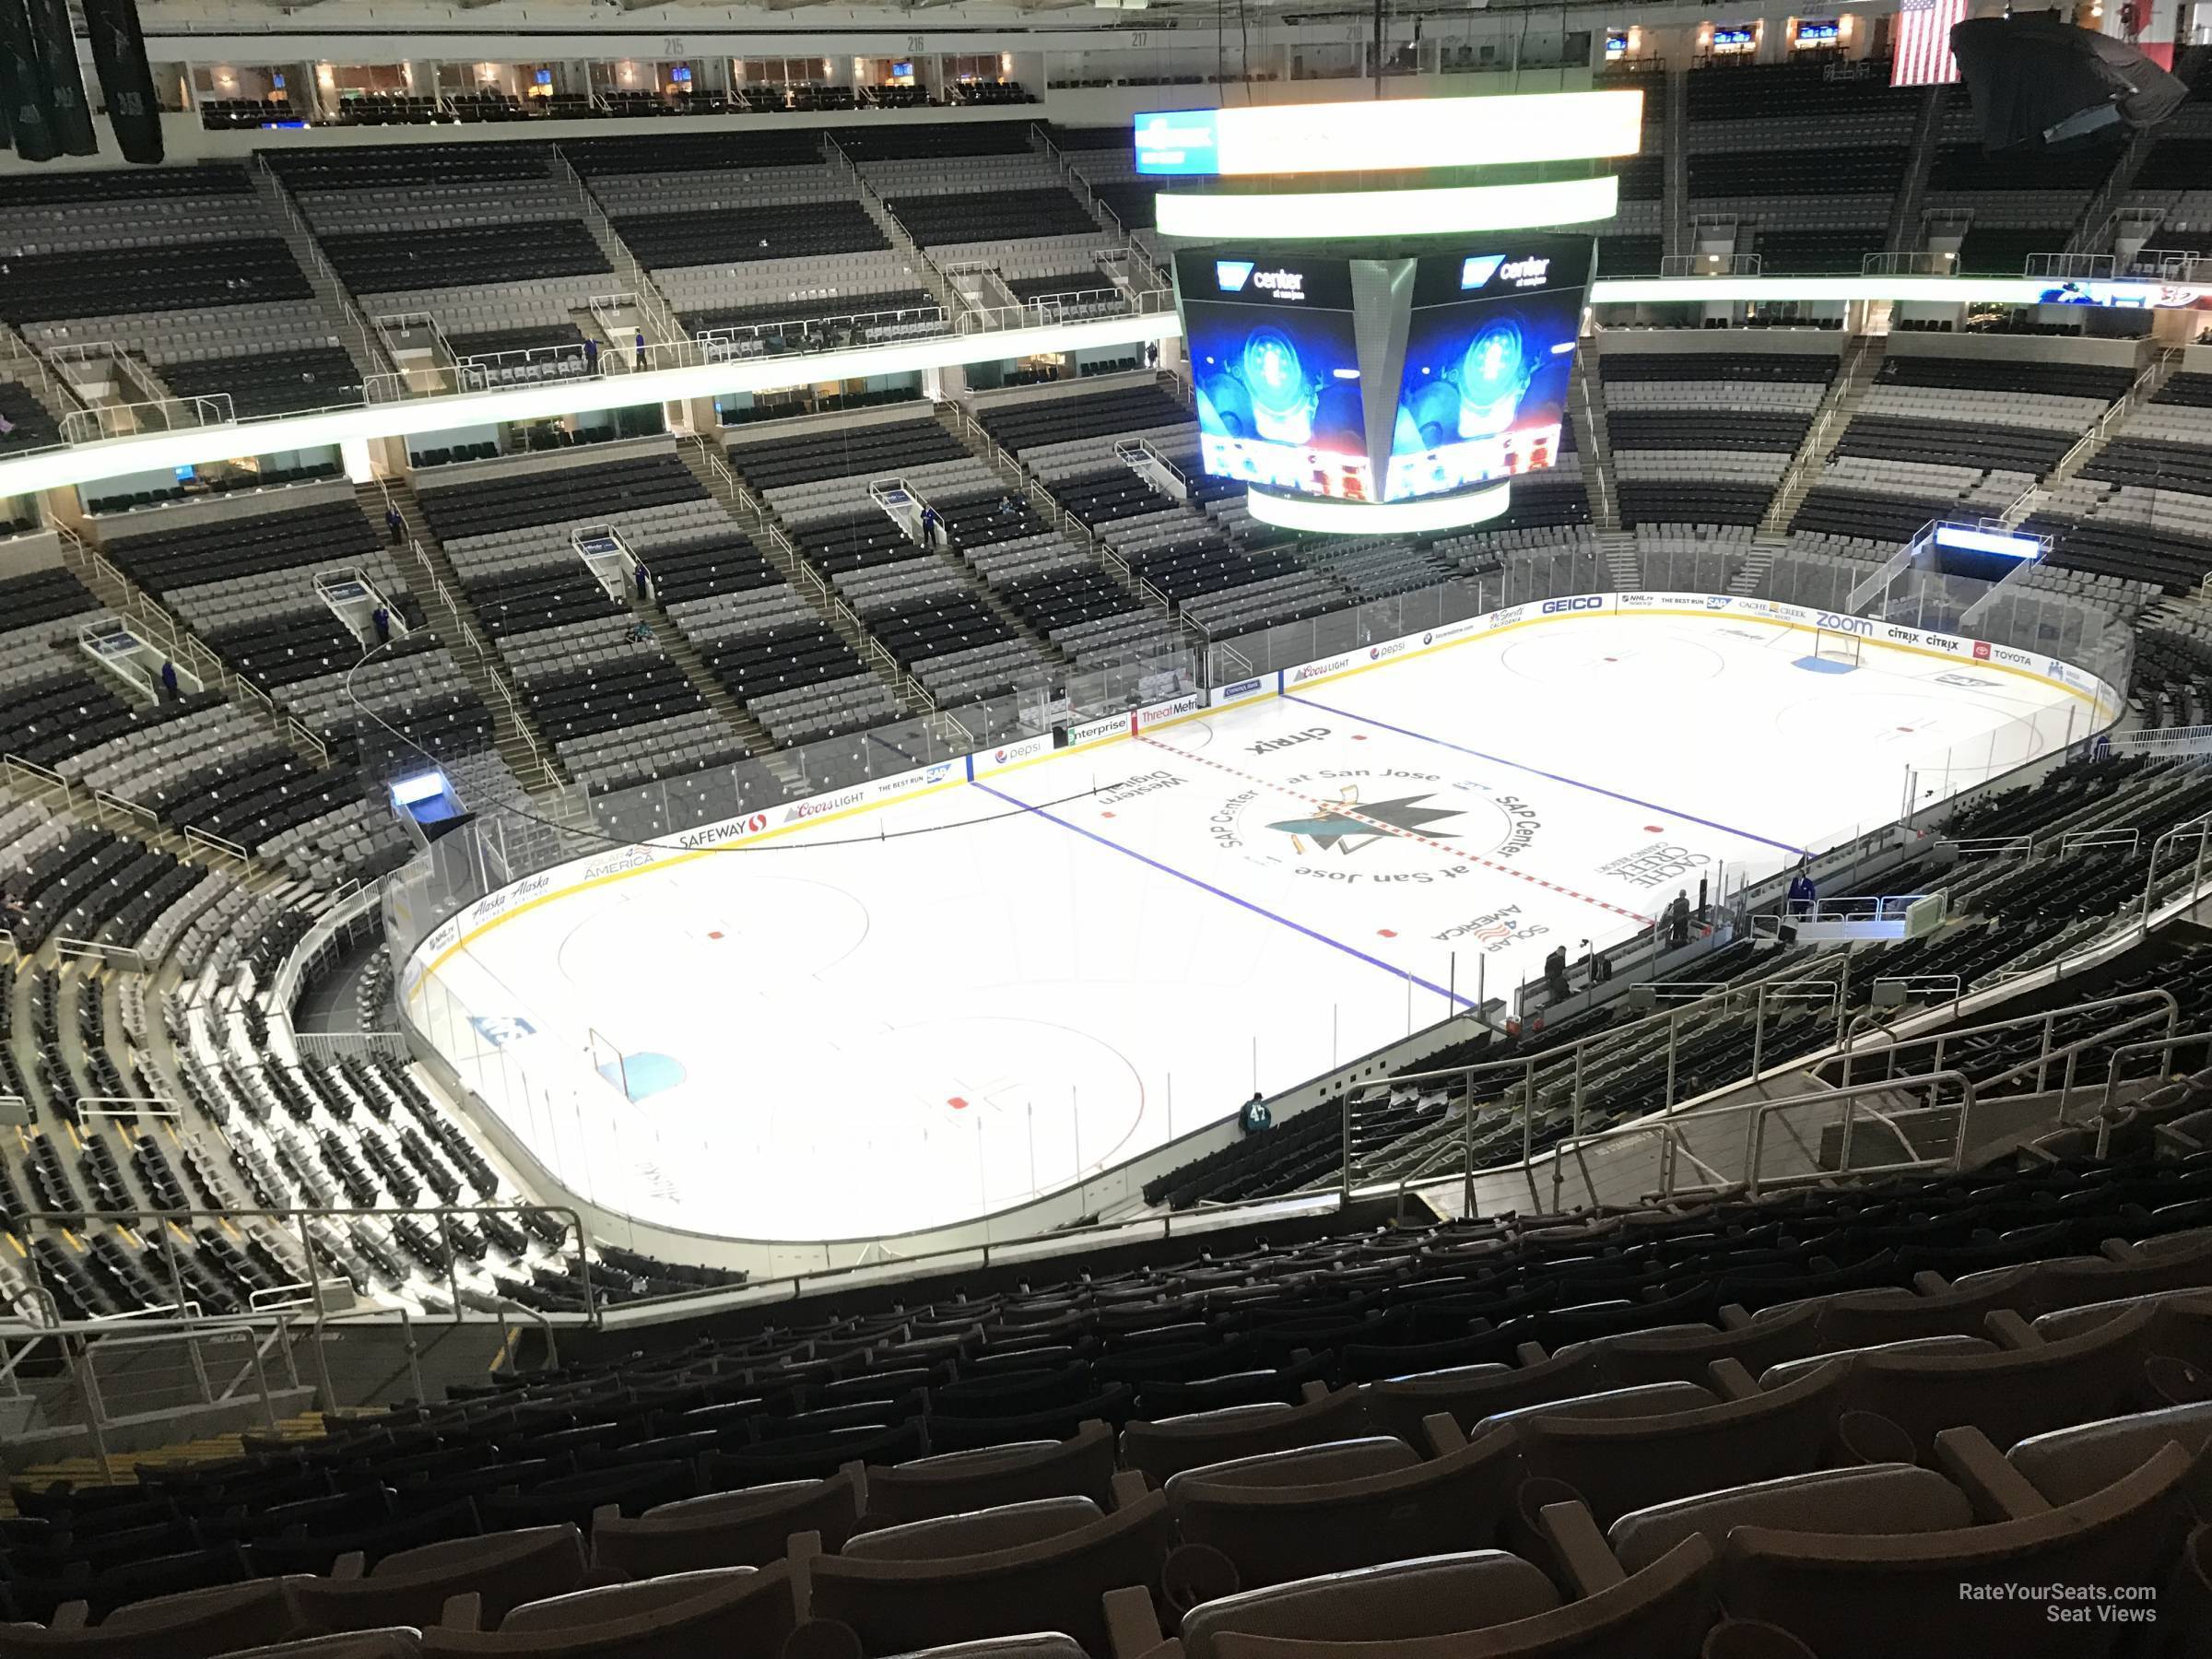 What the Calgary Flames' new arena should copy from the SAP Center